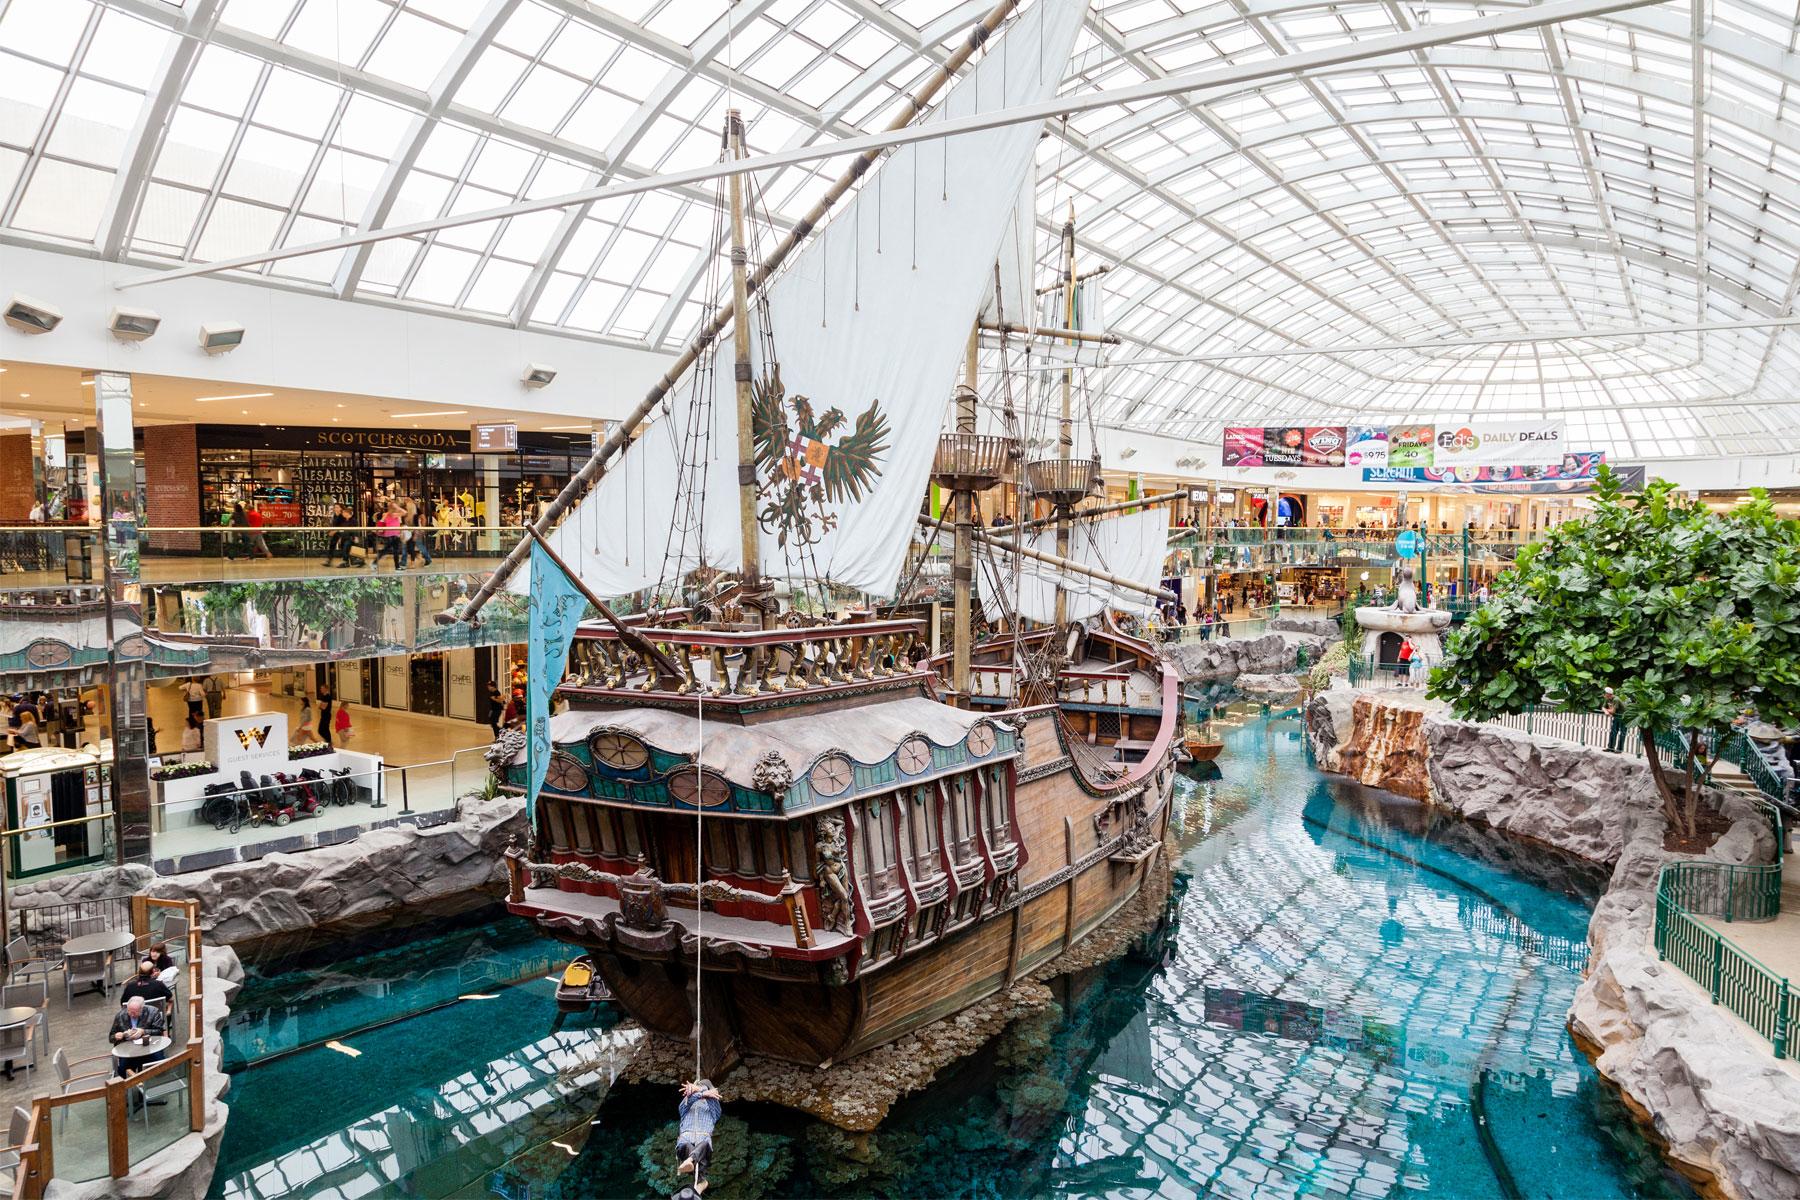 The 10 Best Malls in the World – Fodors Travel Guide